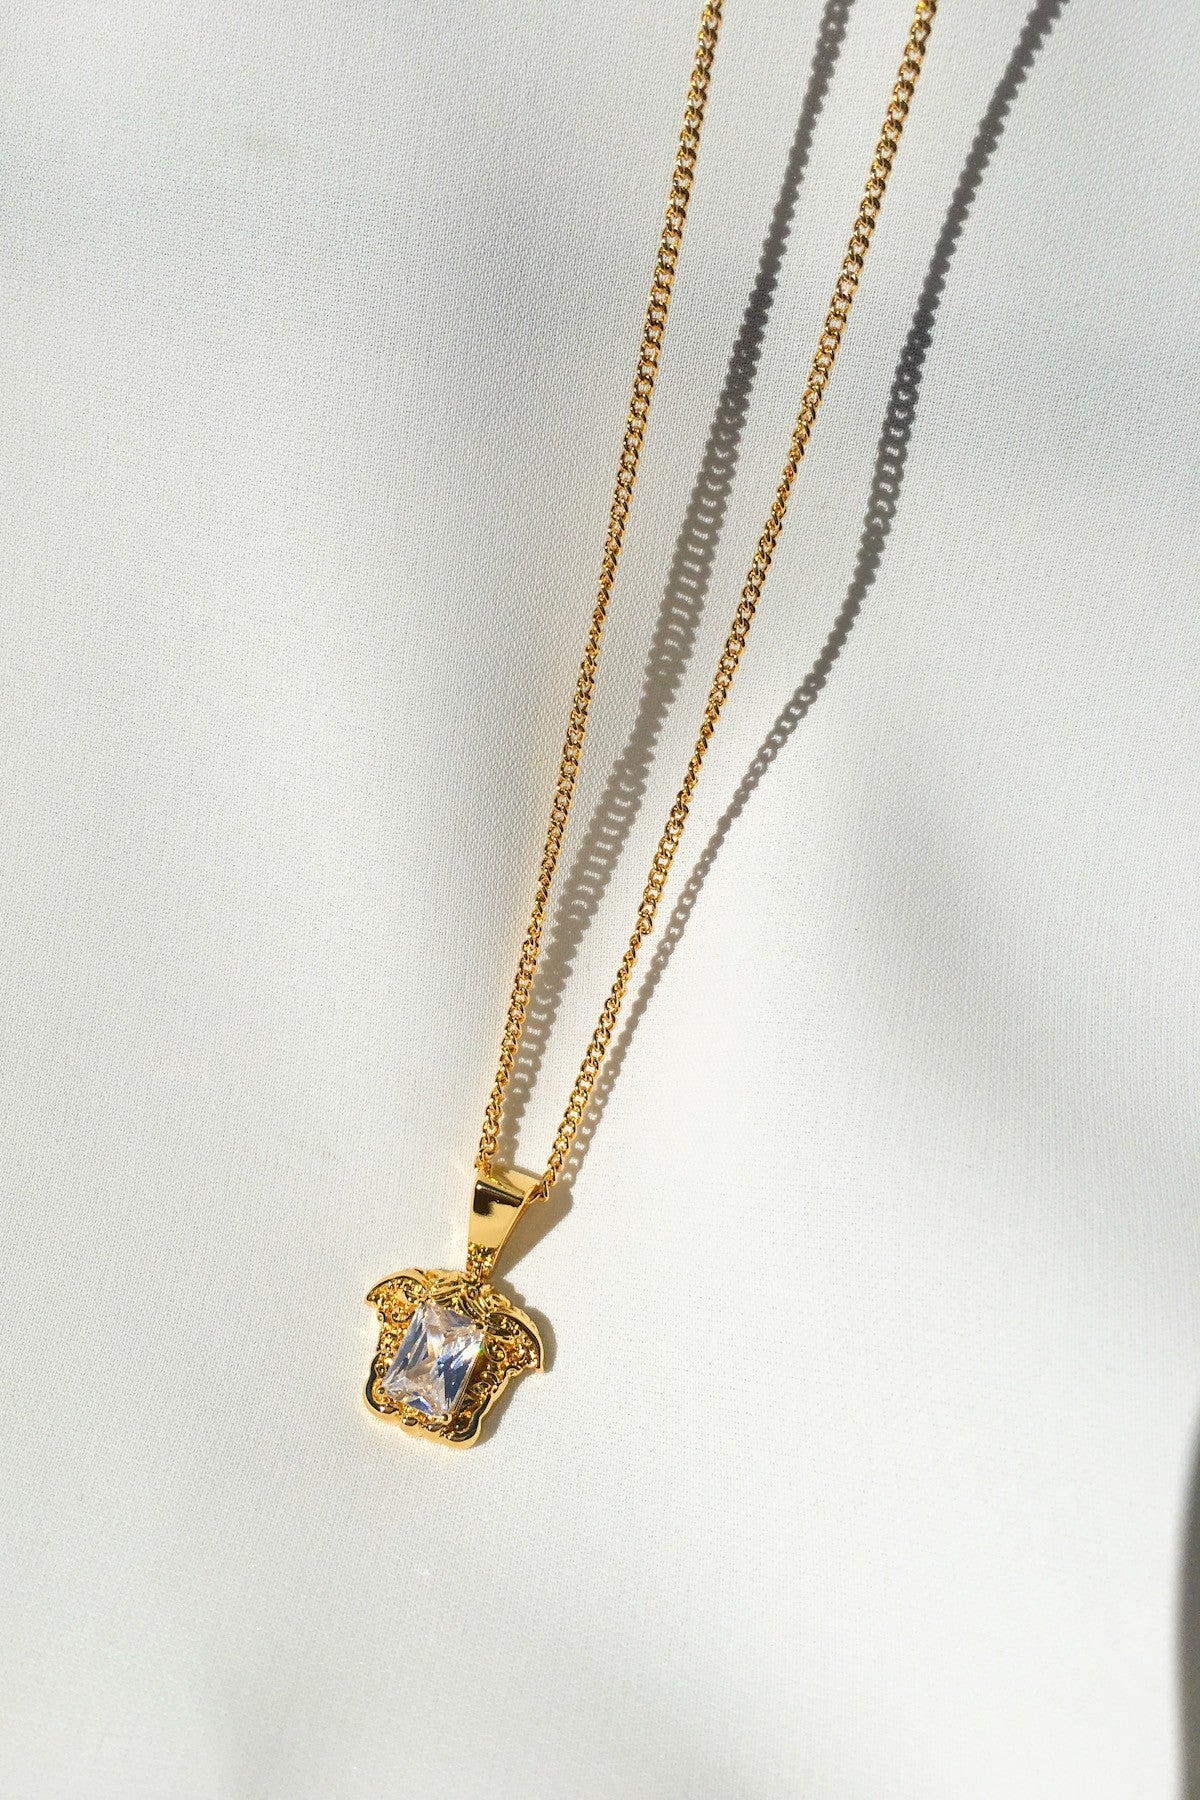 SKYE San Francisco SF California shop ethical sustainable modern chic designer women jewelry Meduse 18K Gold Crystal Necklace